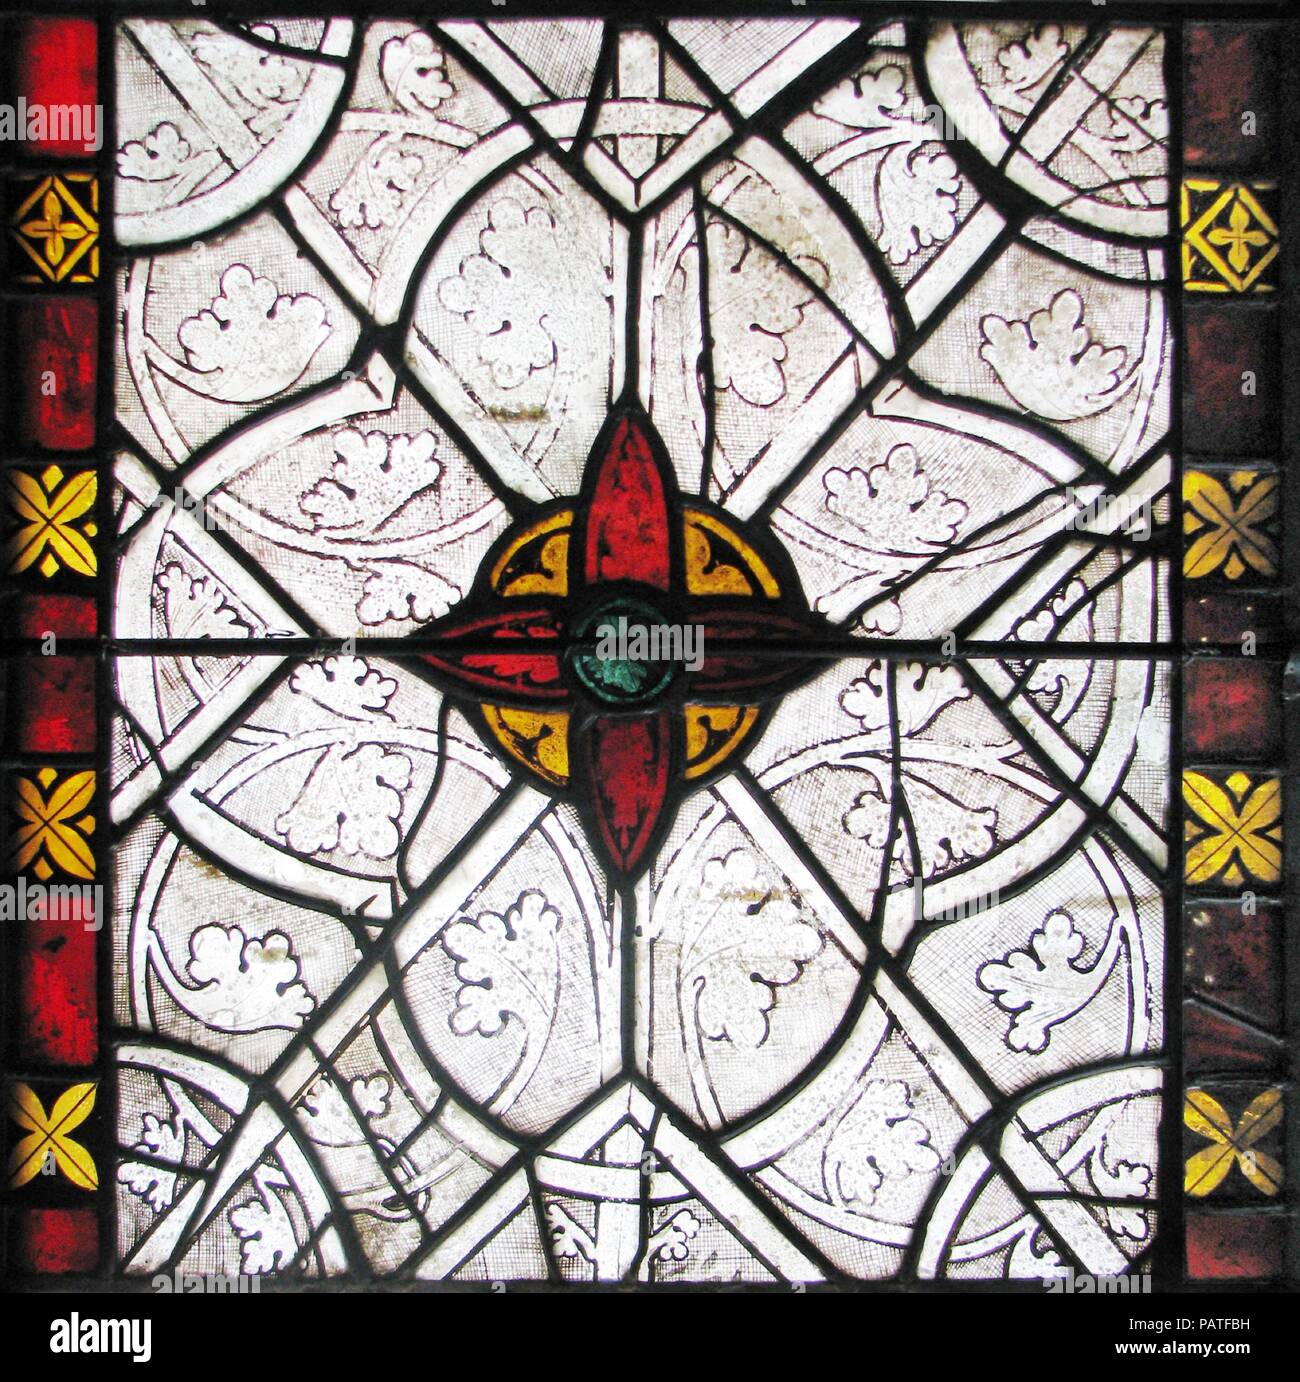 Grisaille Panel. Culture: French. Dimensions: Overall: 22 x 20 1/4in. (55.9 x 51.4cm). Date: 1270-80.  The artistry of this window derives from the contrast between the silvery effect of the grisaille decoration and the radiant colors of the bosses and borders. In addition, the graceful overlay of strapwork on spiraling vines with stylized leaves is enhanced by the bold outline of forms and the dense hatching of the backgrounds.   The windows in the choir chapel at Sées originally consisted of 'band windows,' with colored figural glass in the central zones and grisaille panels above and below. Stock Photo